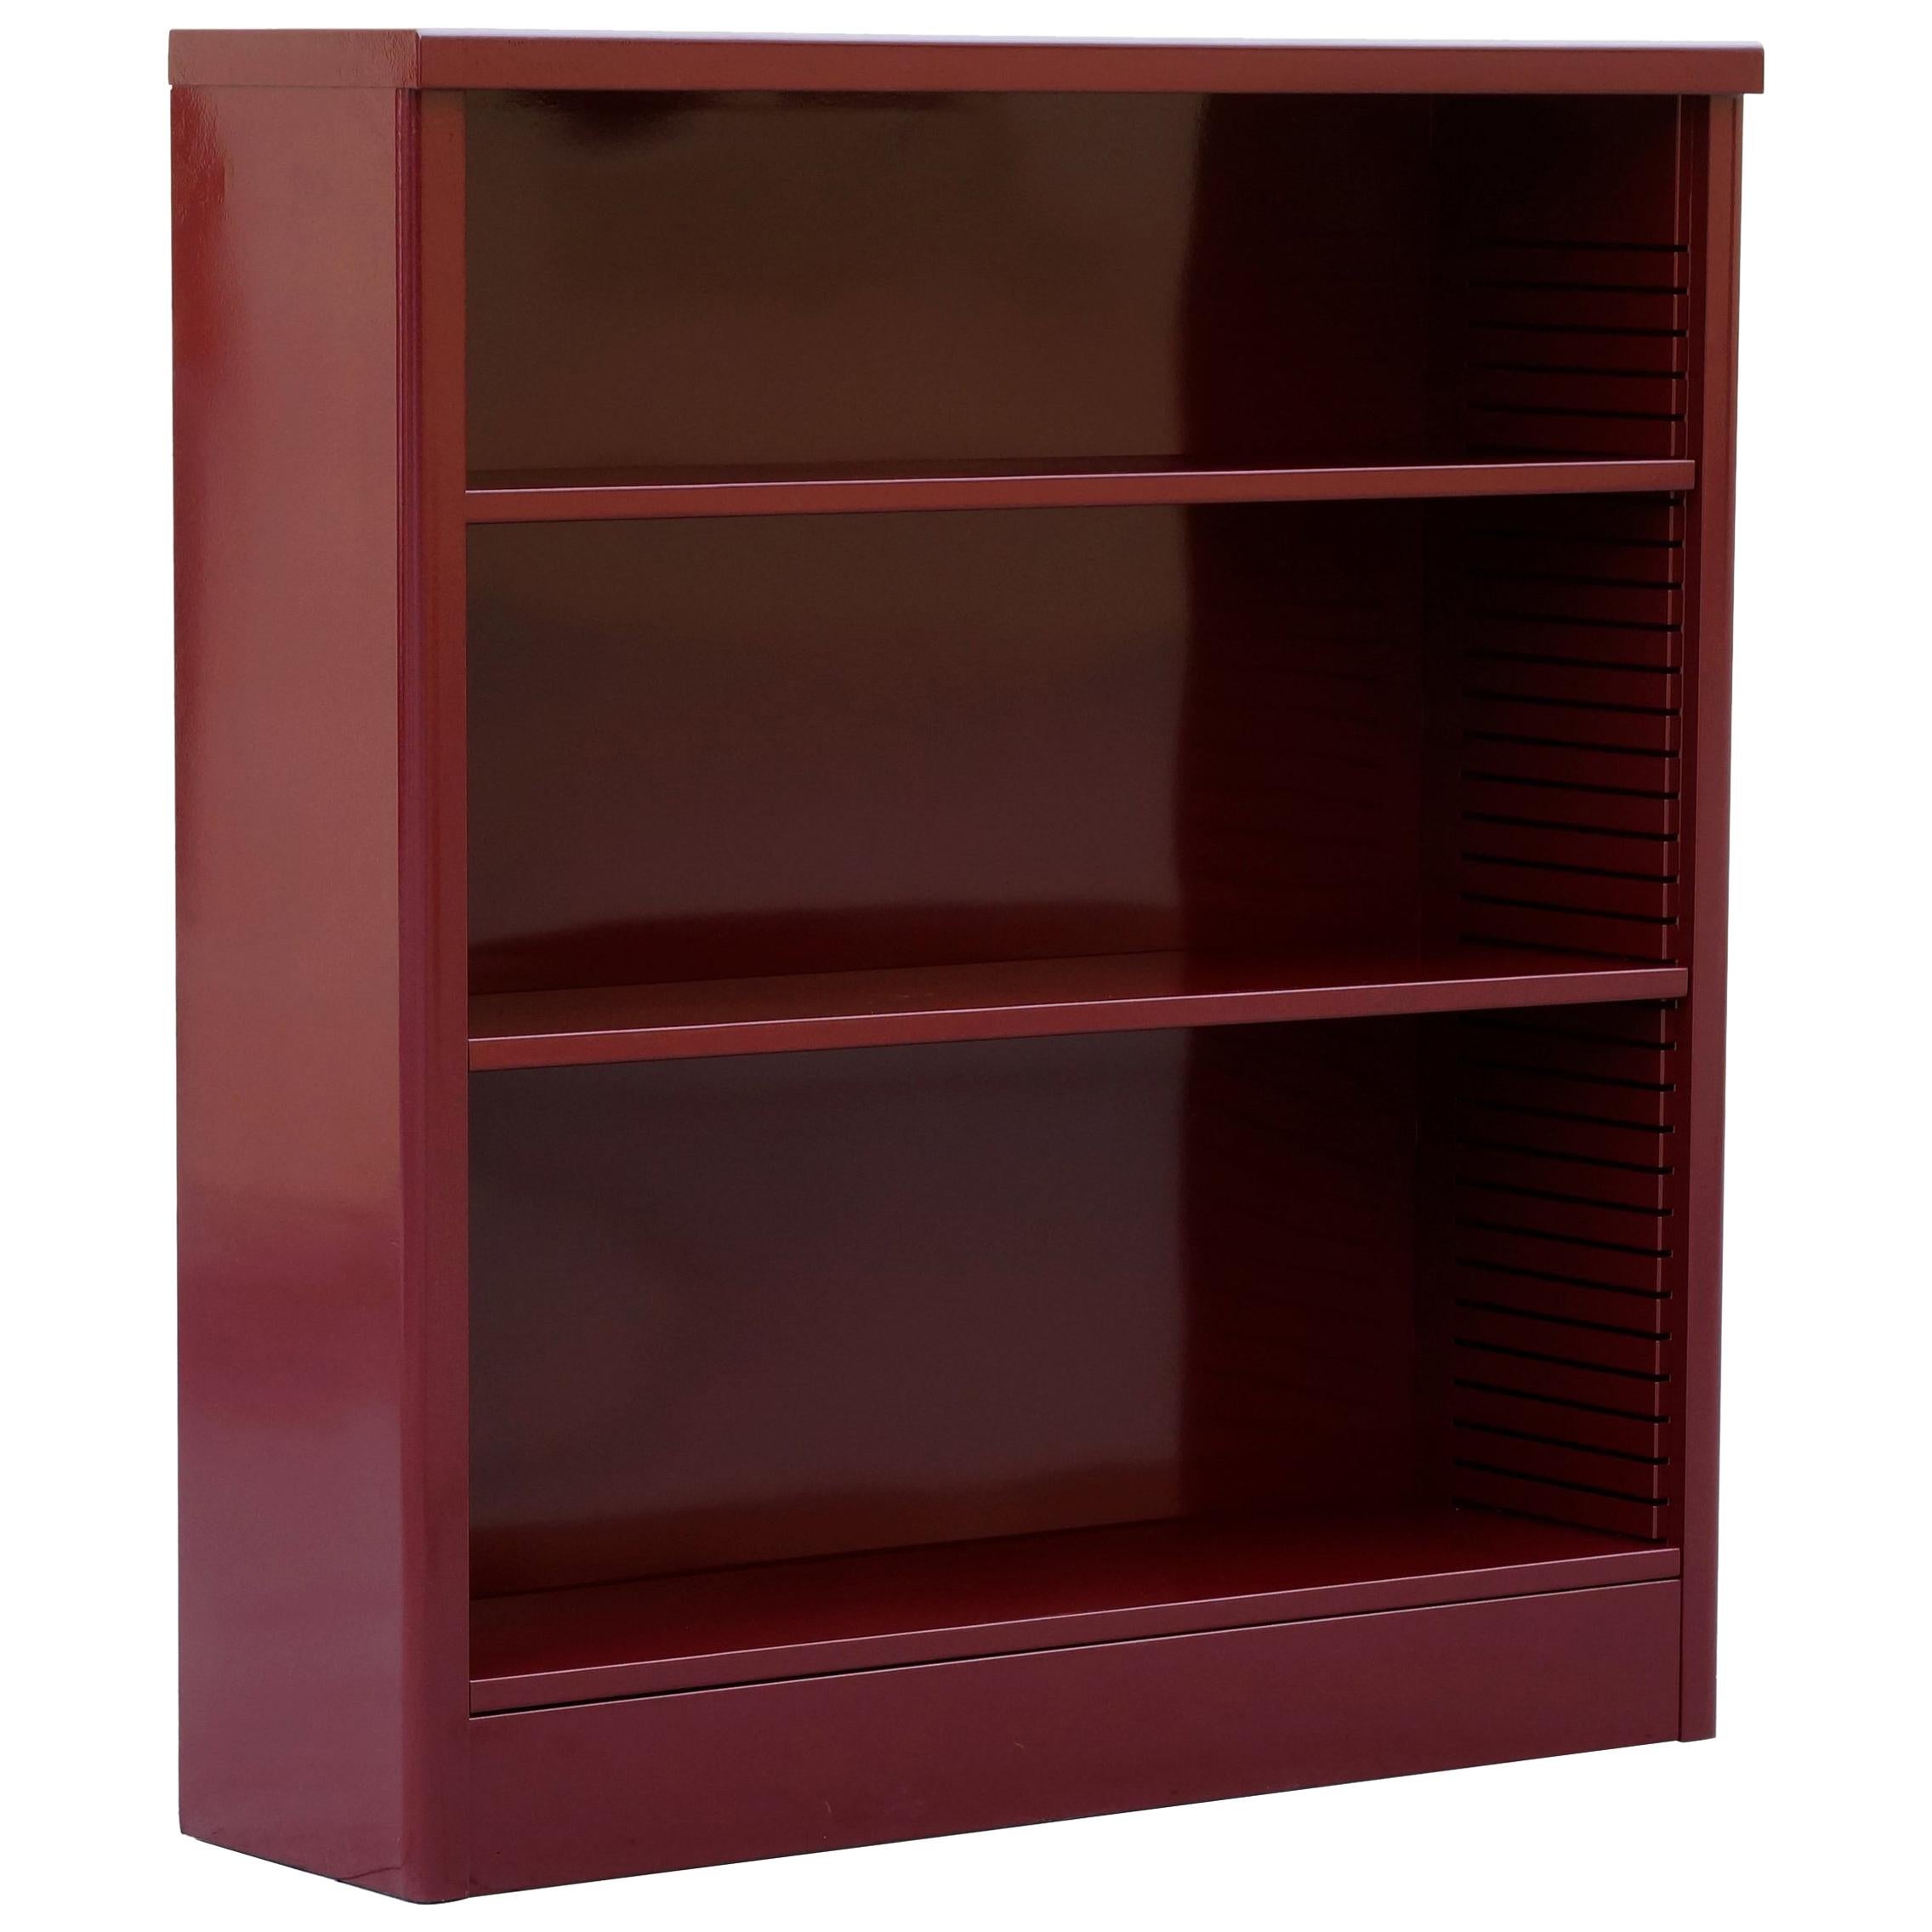 1960s Steel Bookcase Refinished in Wine Red For Sale